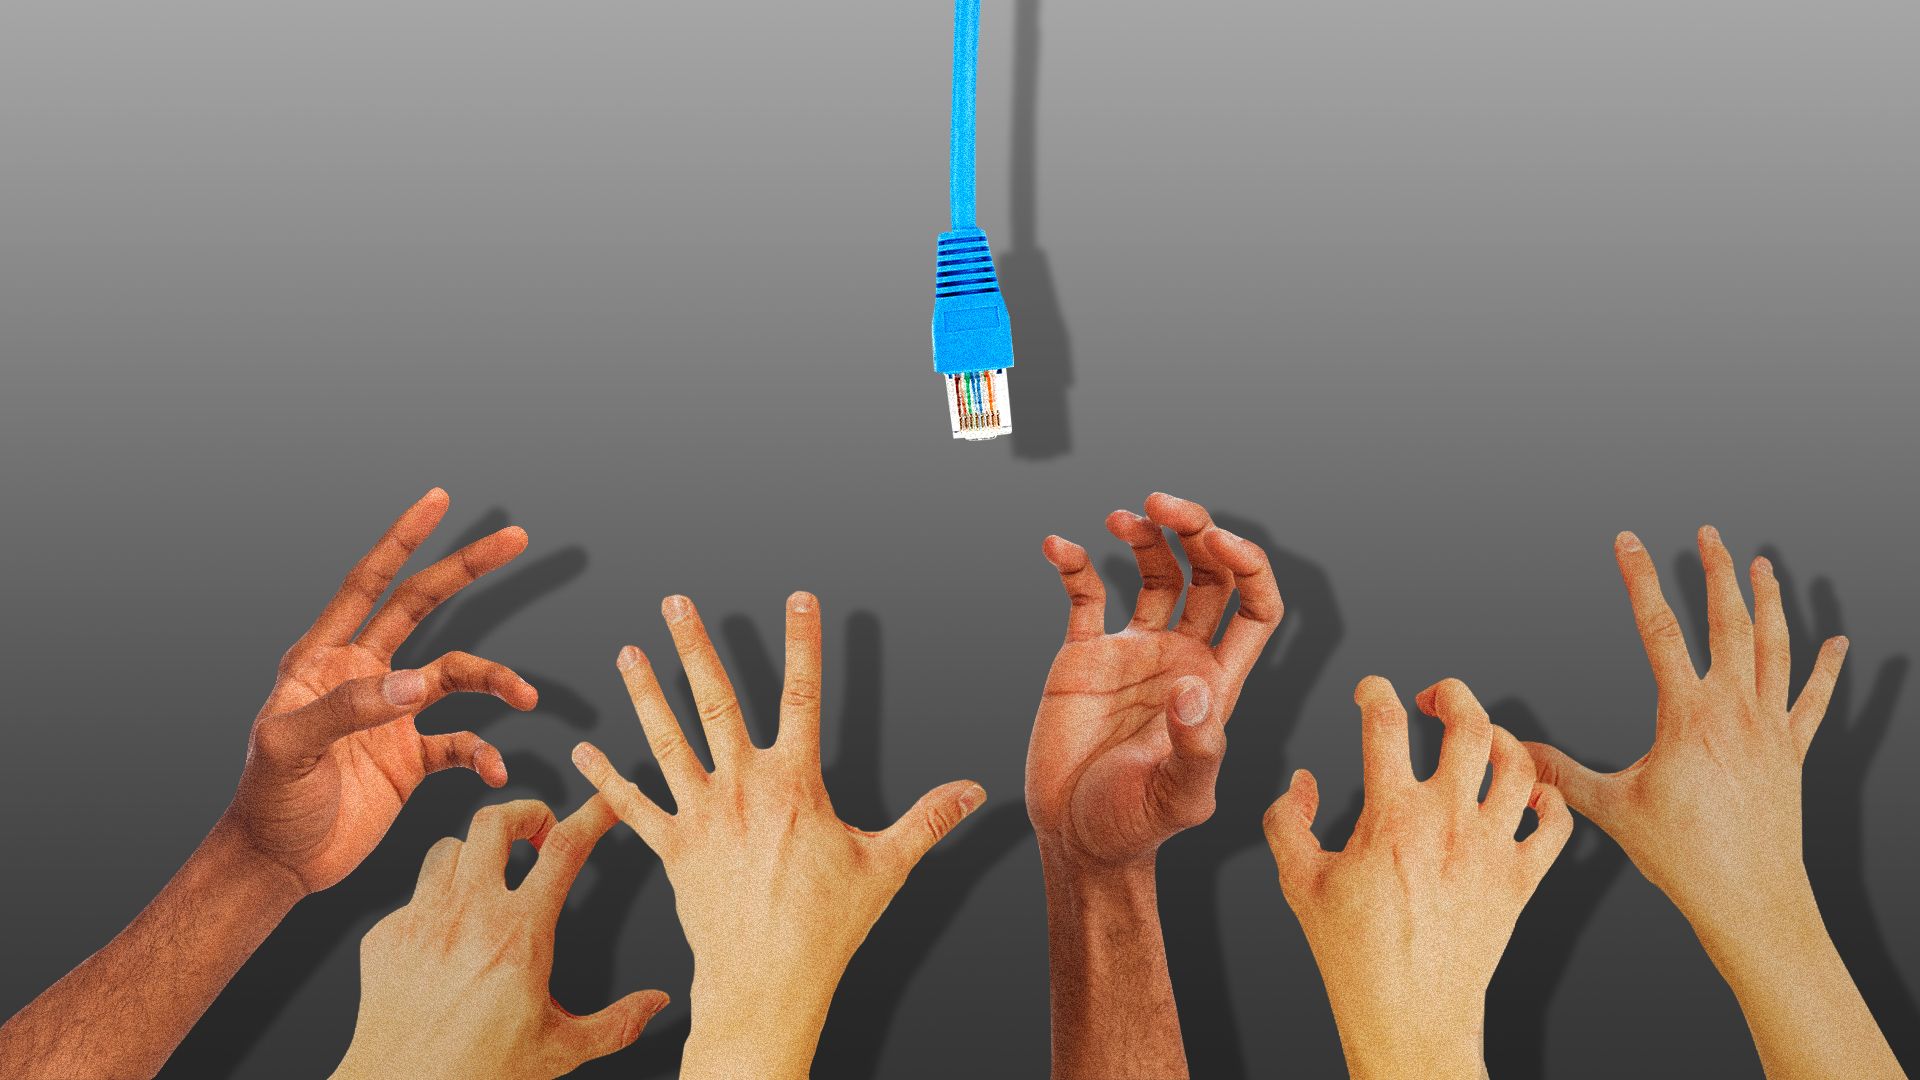 Illustration of hands reaching up to a dangling Ethernet cable